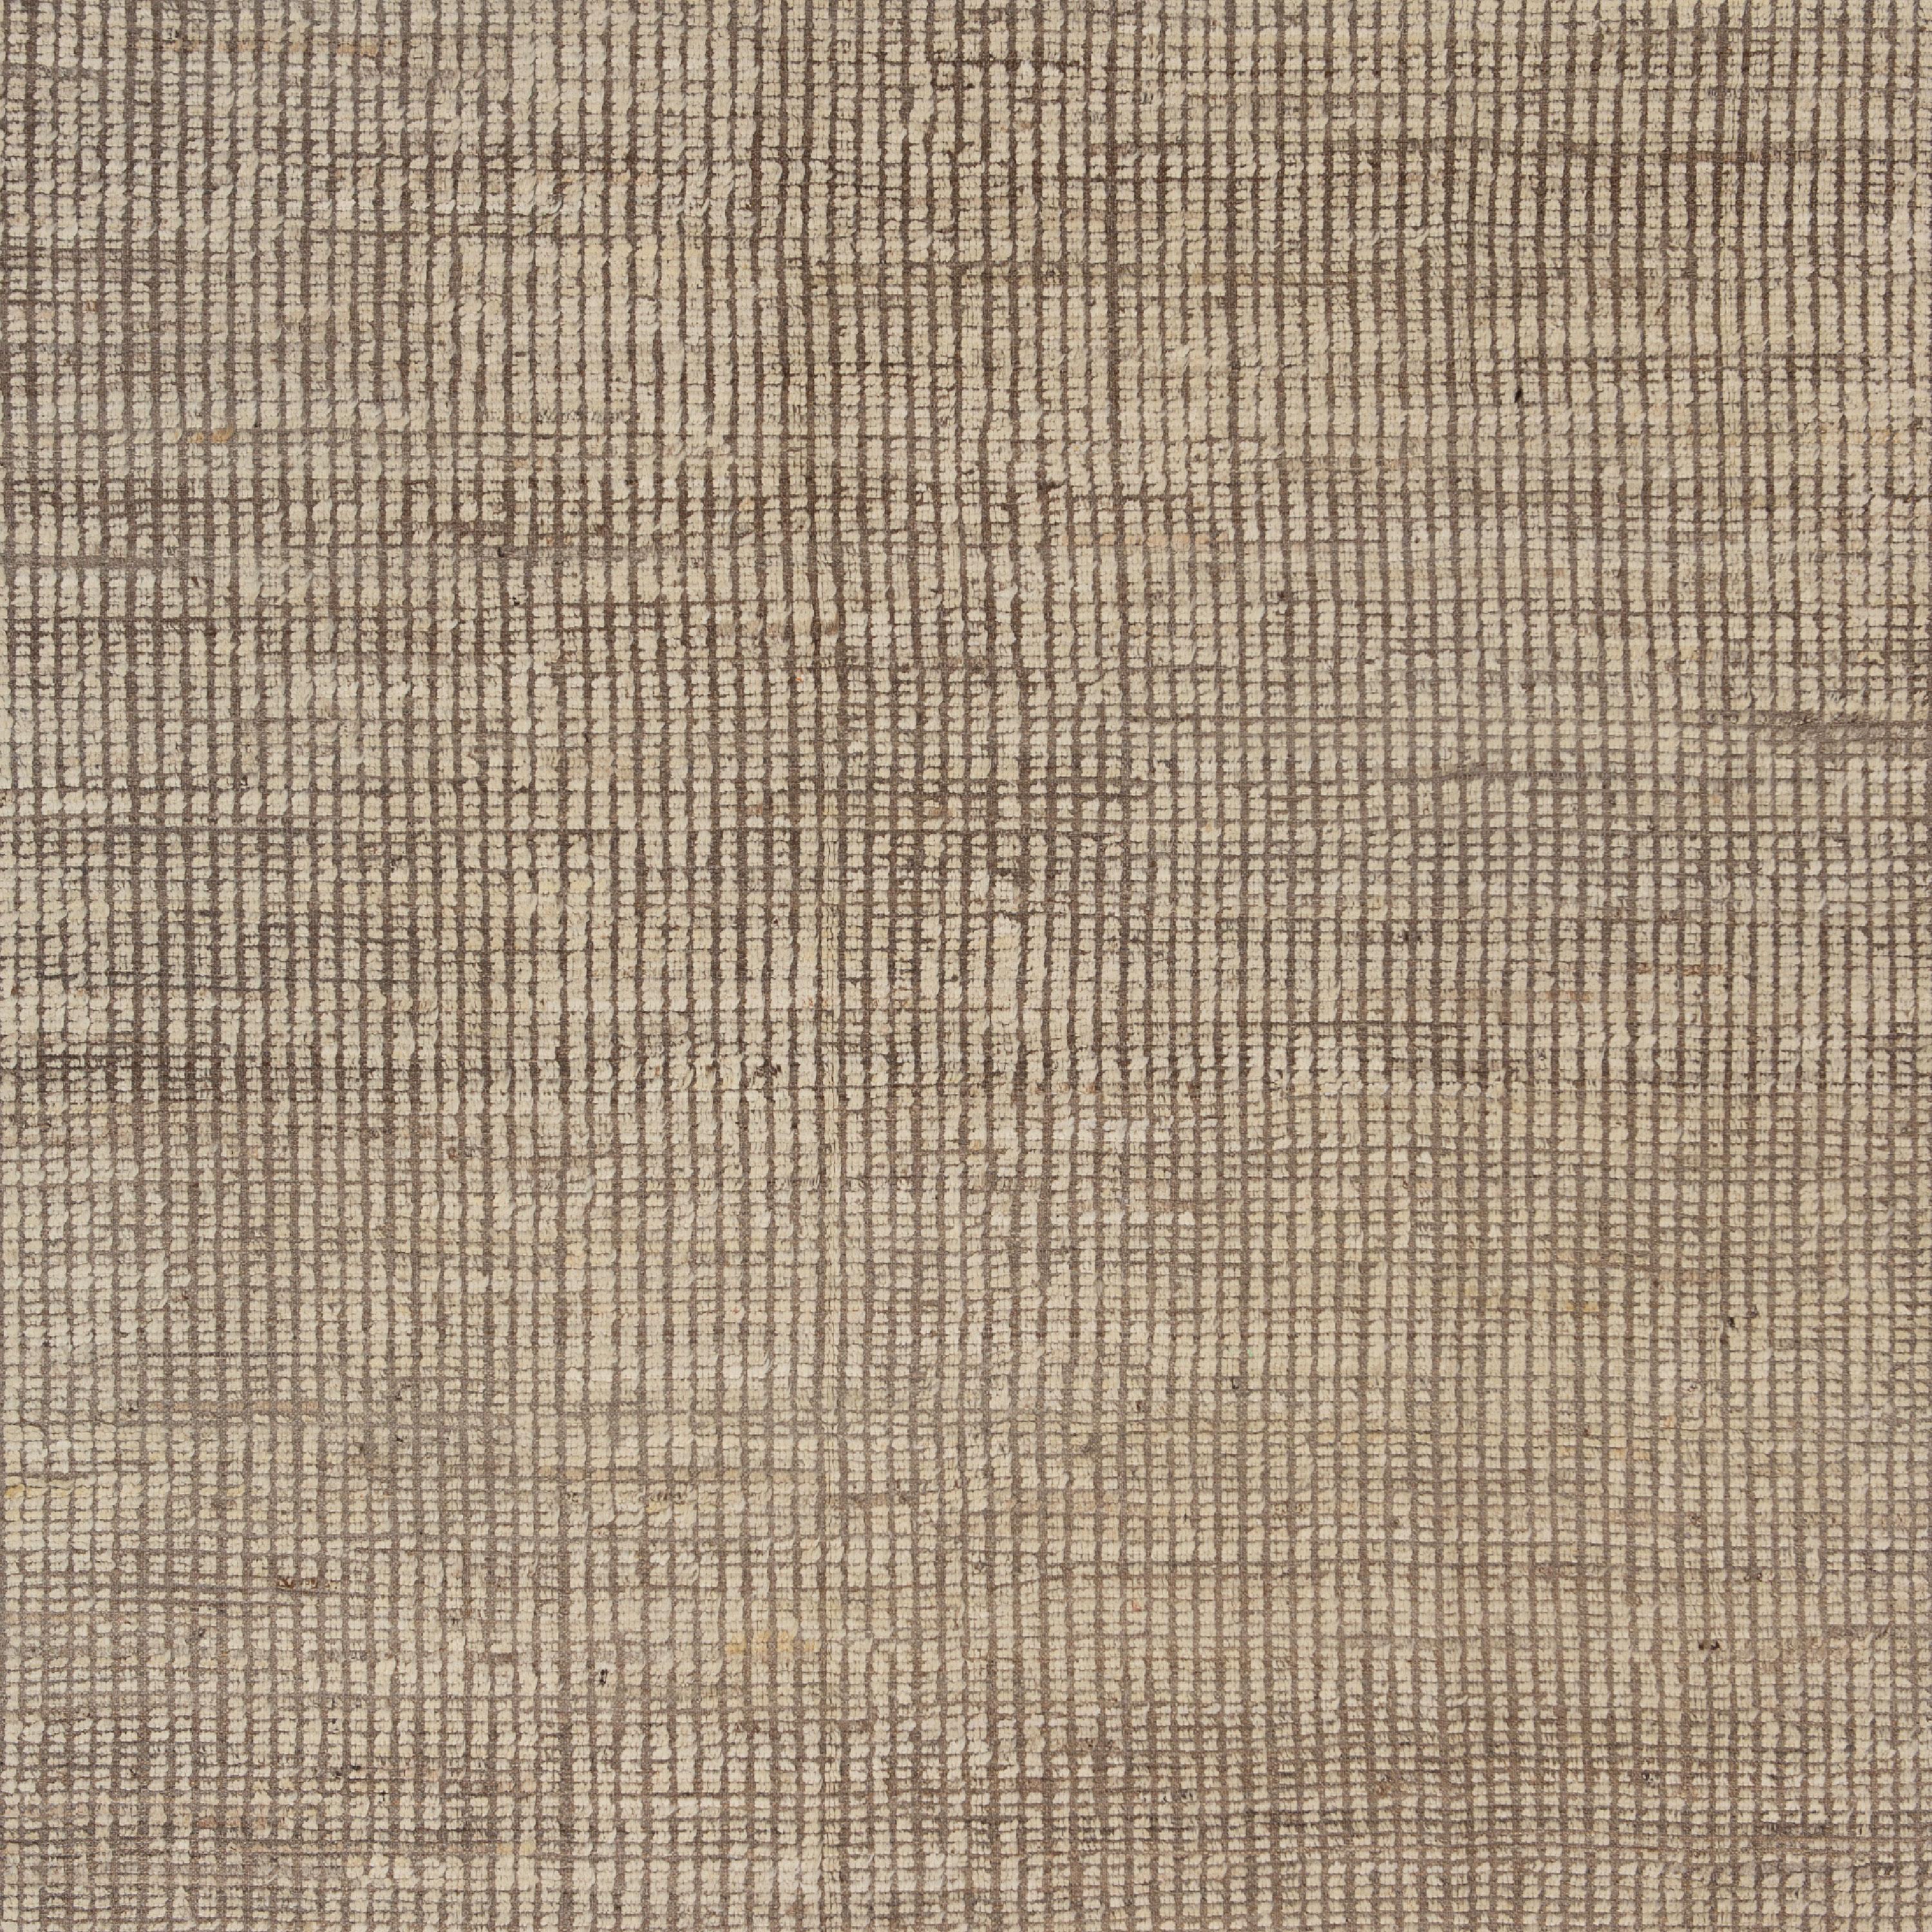 Inspired by the grounding foundations of Earth's natural colors and pure materials, this Zameen Beige Solid Modern Wool Rug - 6'11